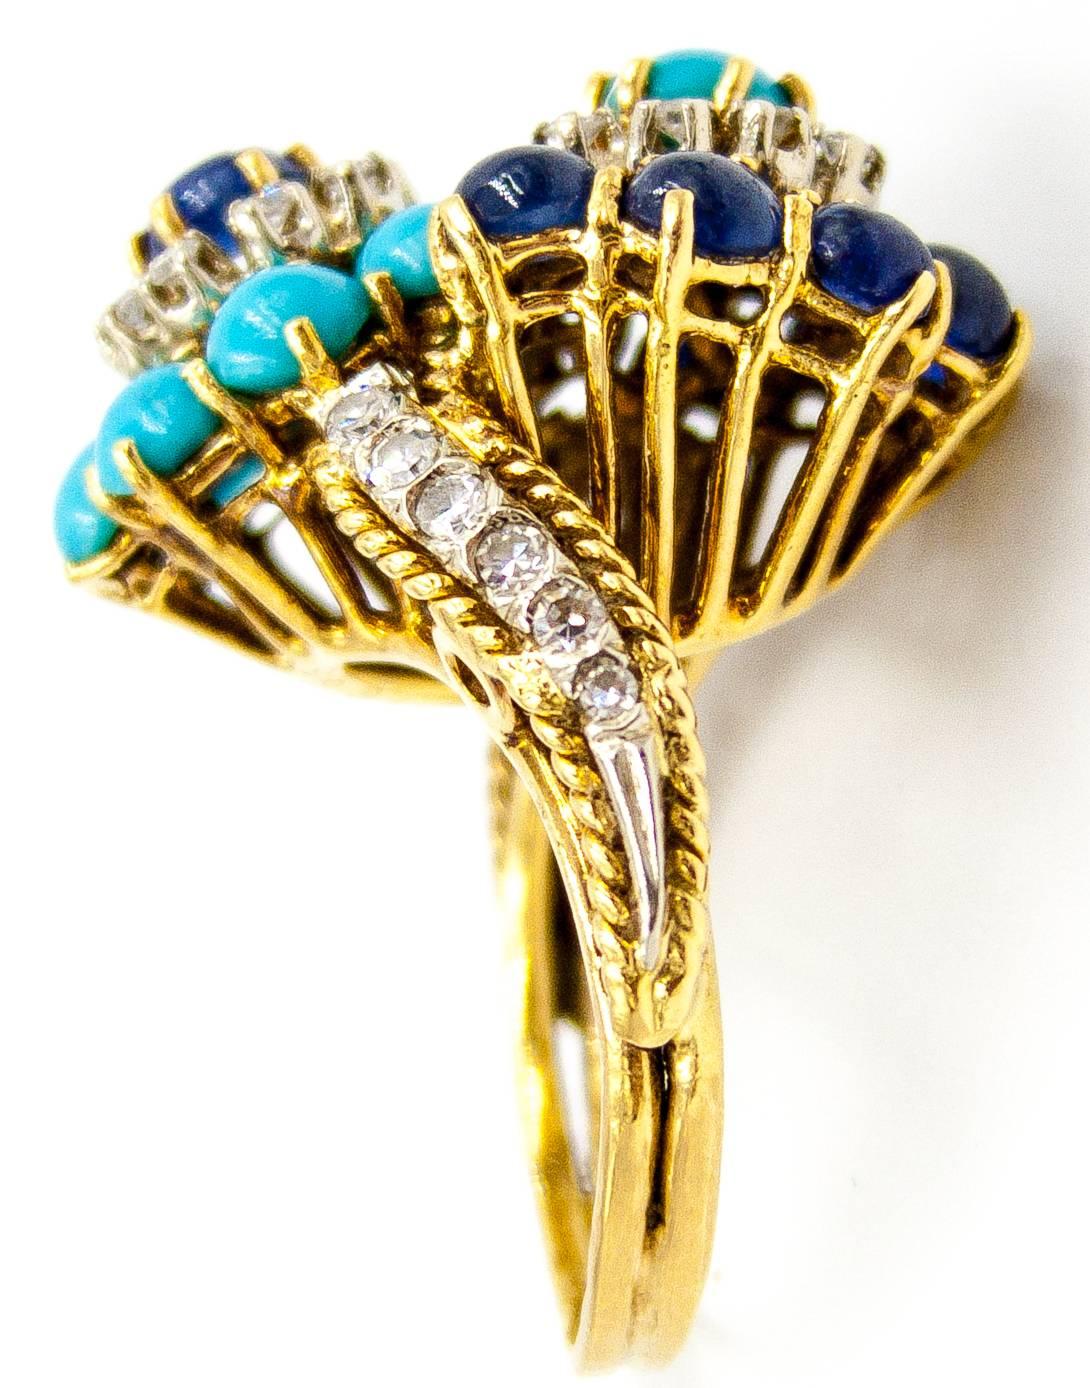 A lovely and eye catching ring with perfect colors to brighten any season.   Turquoise cabochons encircle a cabochon sapphire and diamonds, balanced at the other side by the reverse image of turquoise and diamonds surrounded by excellent color